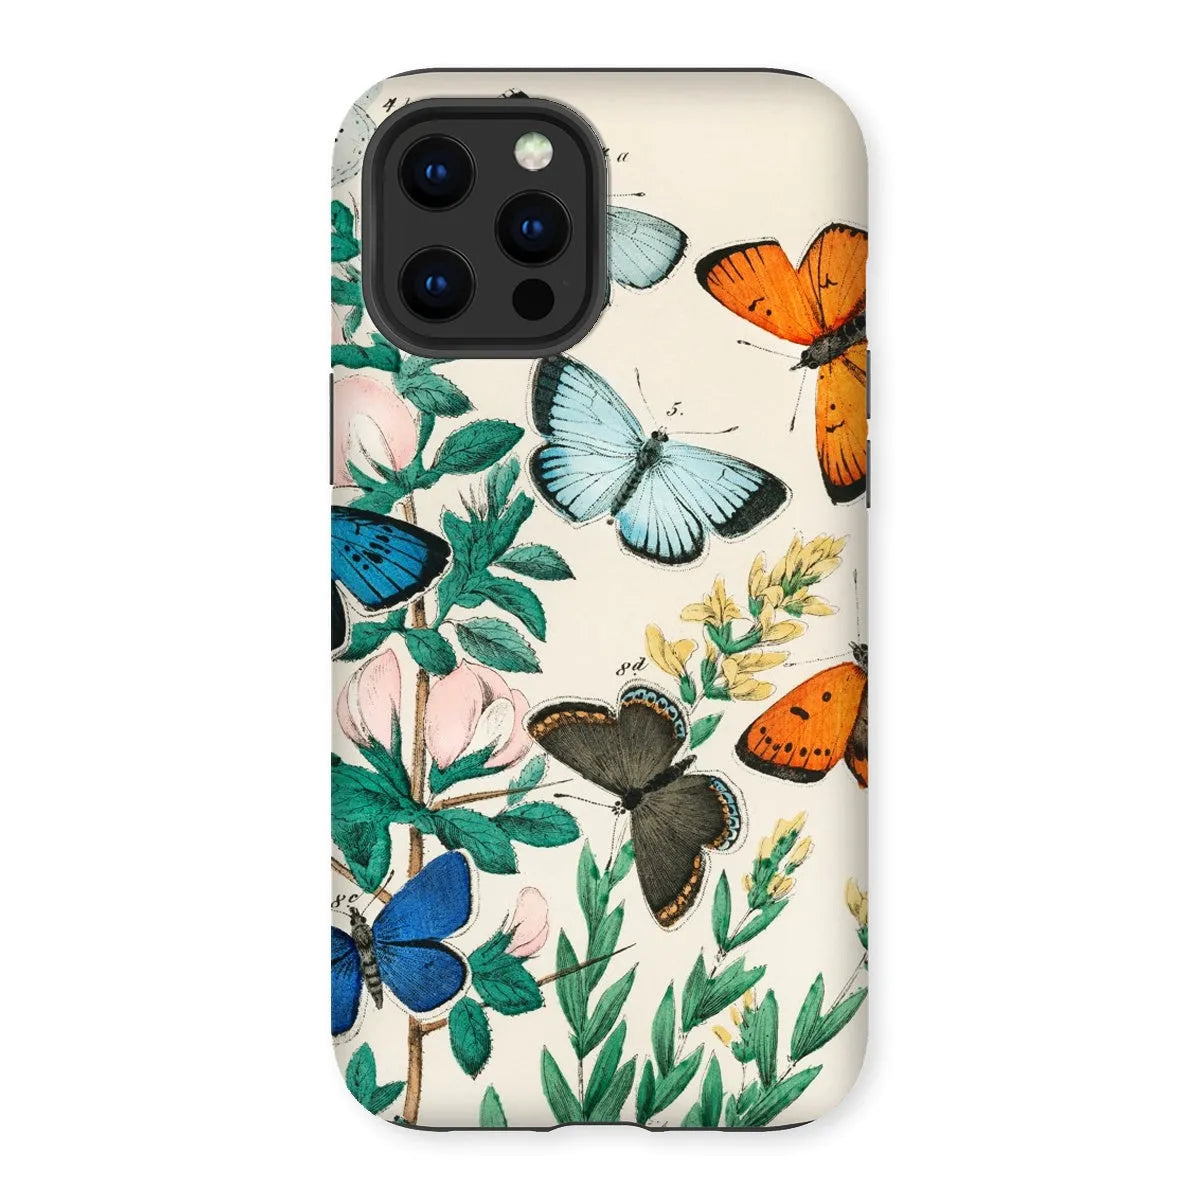 Another Butterfly Aesthetic Art Phone Case - William Forsell Kirby - Iphone 12 Pro Max / Matte - Mobile Phone Cases